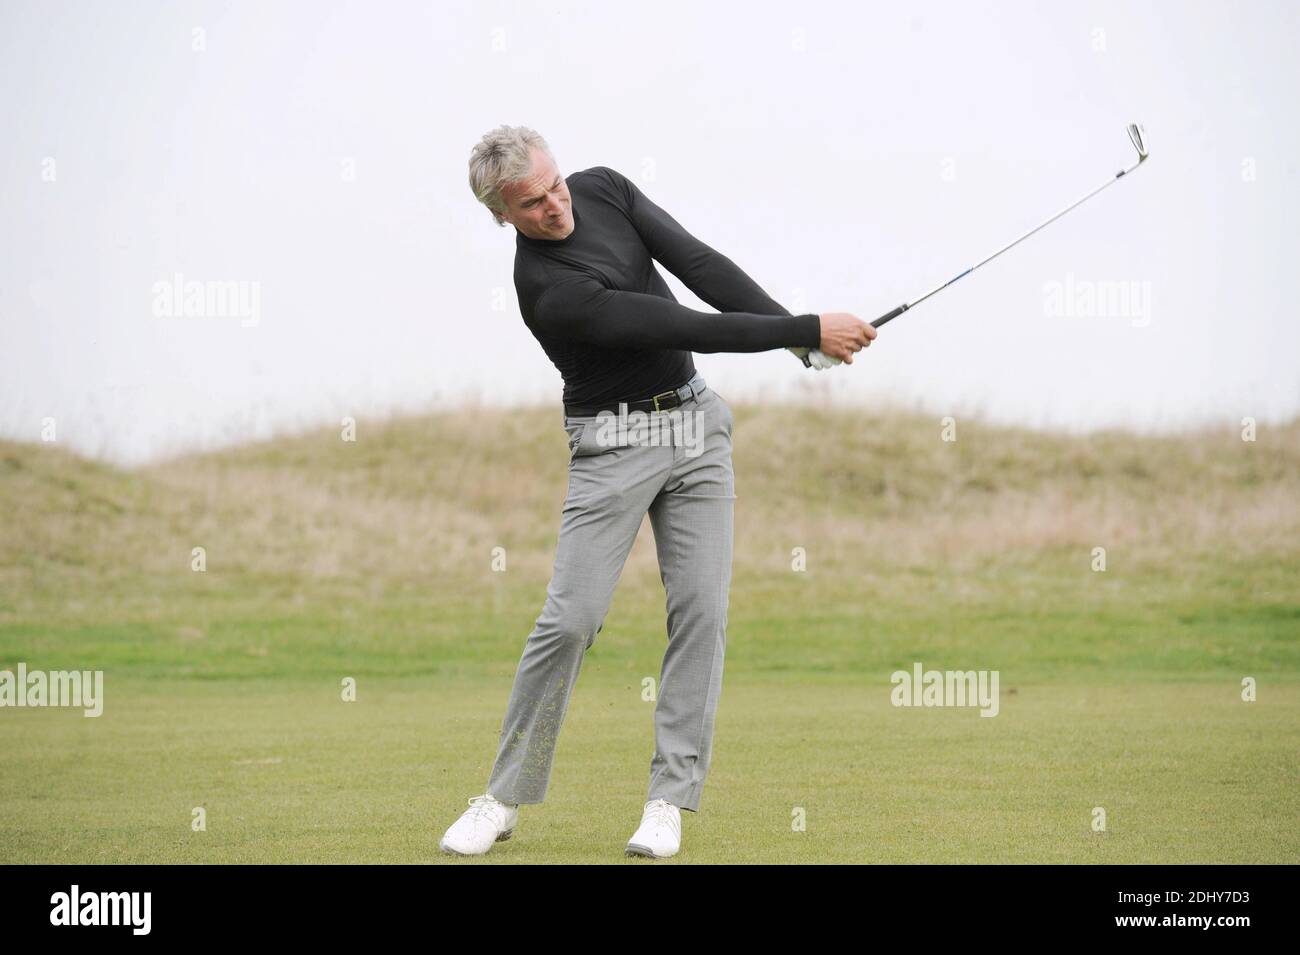 File photo : David Ginola plays golf during the Novotel Celebrity  tournament at the Golf National in Guyancourt near Paris, France on October  15, 2010. Former Newcastle United and PSG player David